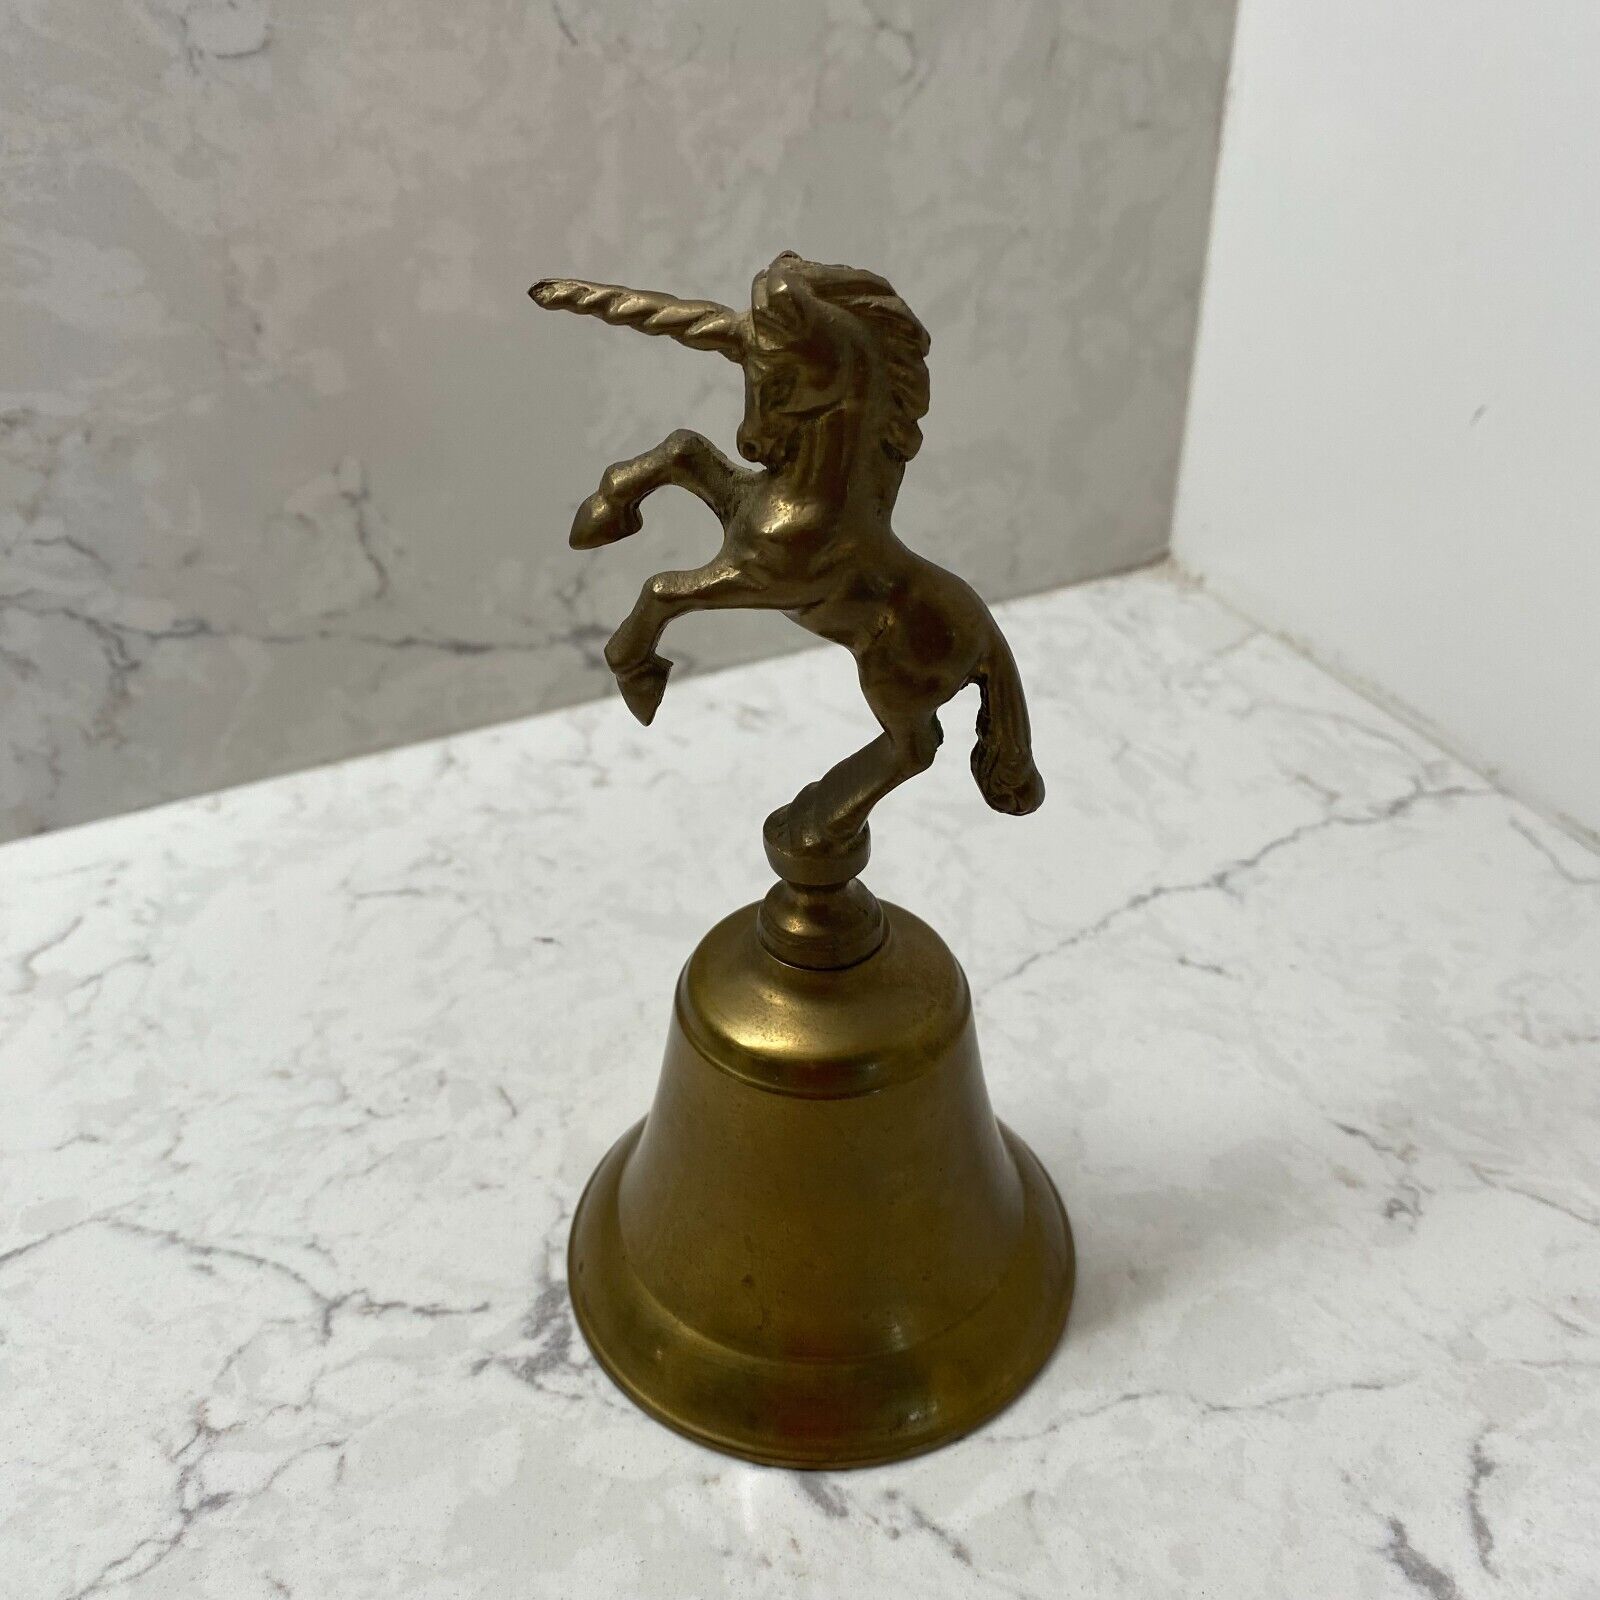 Vintage Solid Brass Collectible Home Decorative Magical Fantasy Unicorn Bell